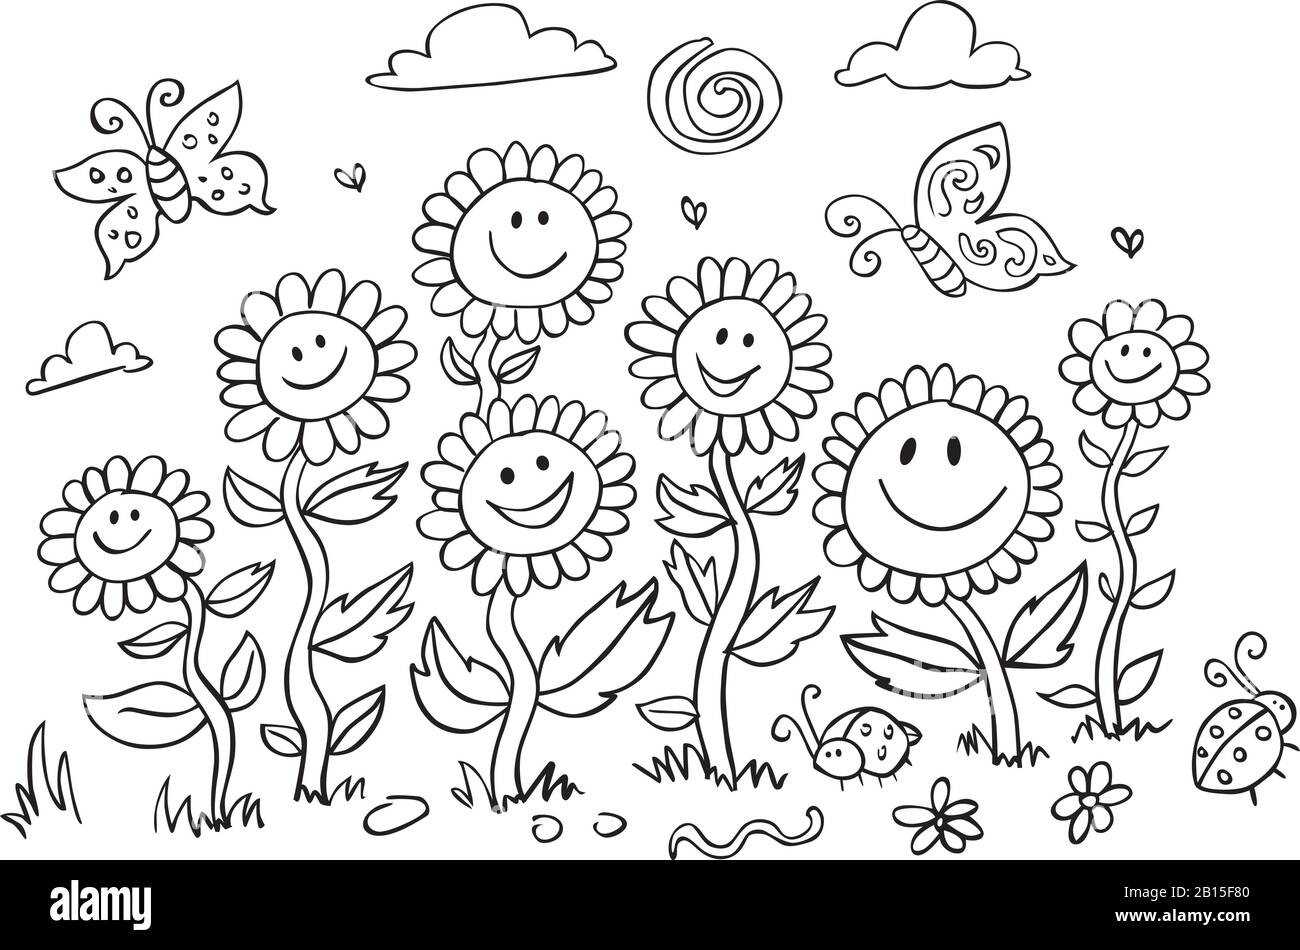 Vector black and white cartoon sunflowers illustration. Suitable for greeting cards, colouring activity and wall murals. Stock Vector